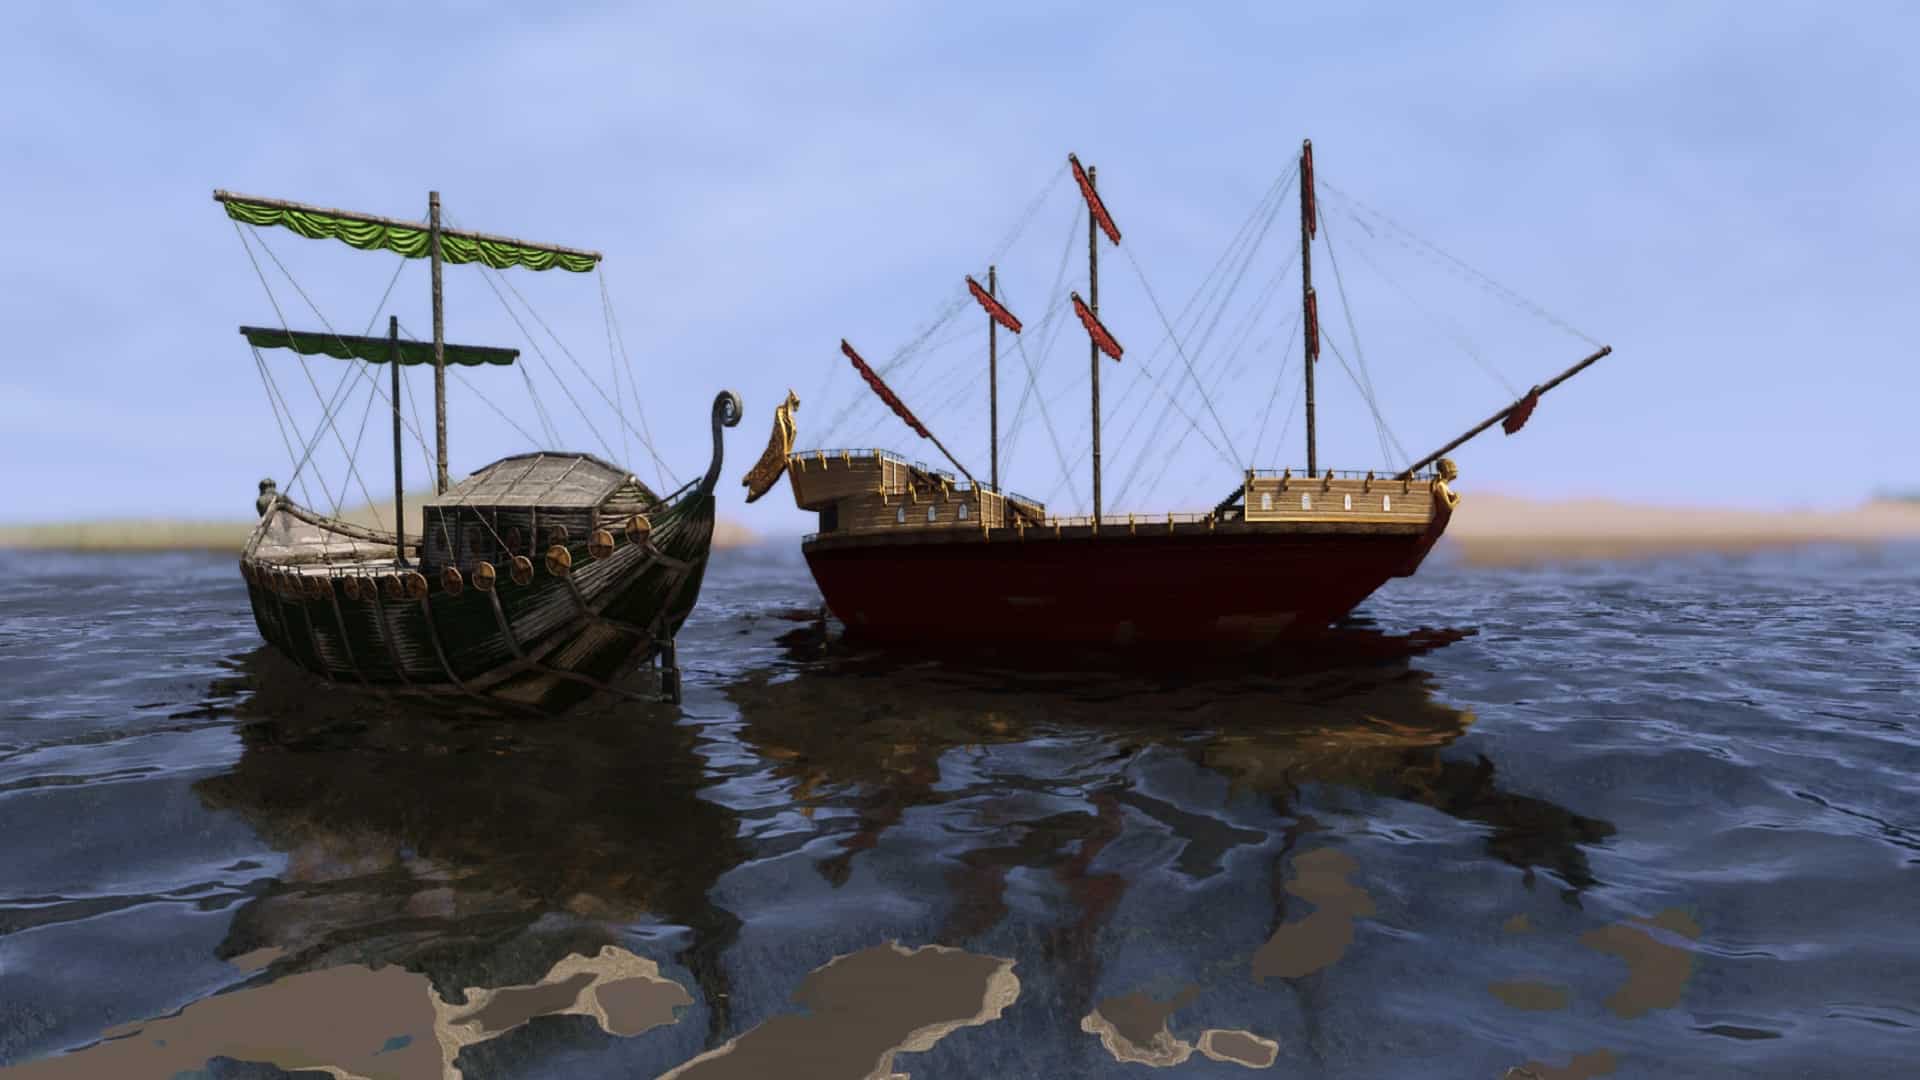 Image from the Skyrim mod Wanderer's Heart showing two pirate ships at sea.